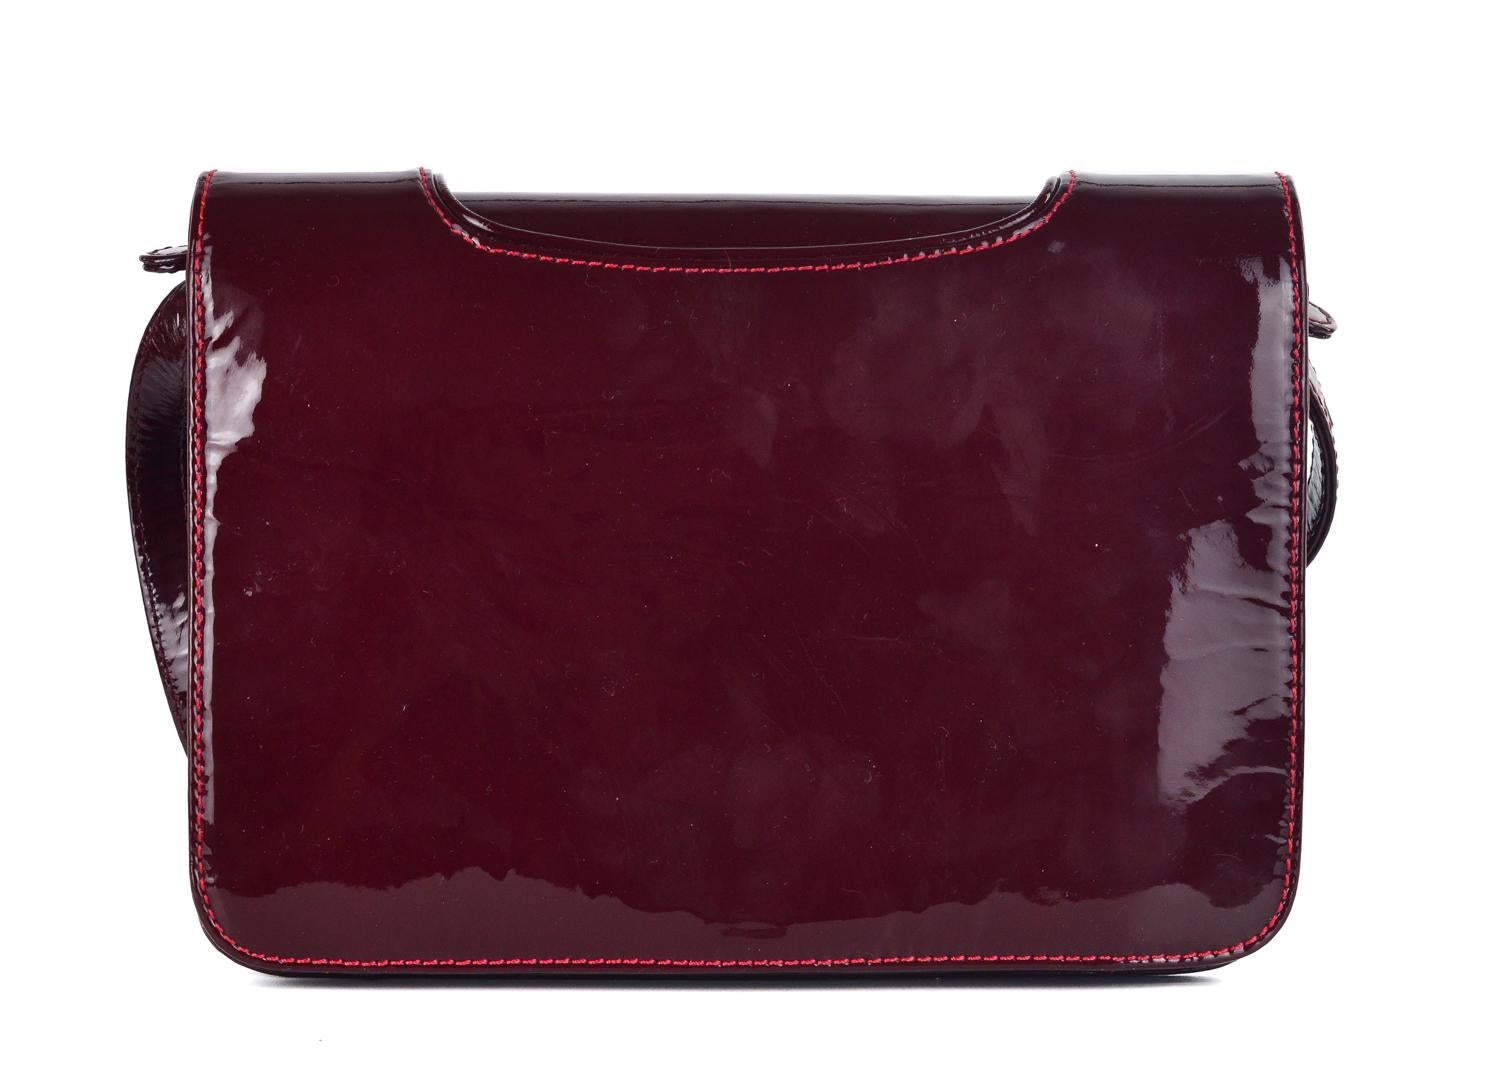 Christian Louboutin Women's Burgundy Patent Shoulder Bag In New Condition For Sale In Brooklyn, NY